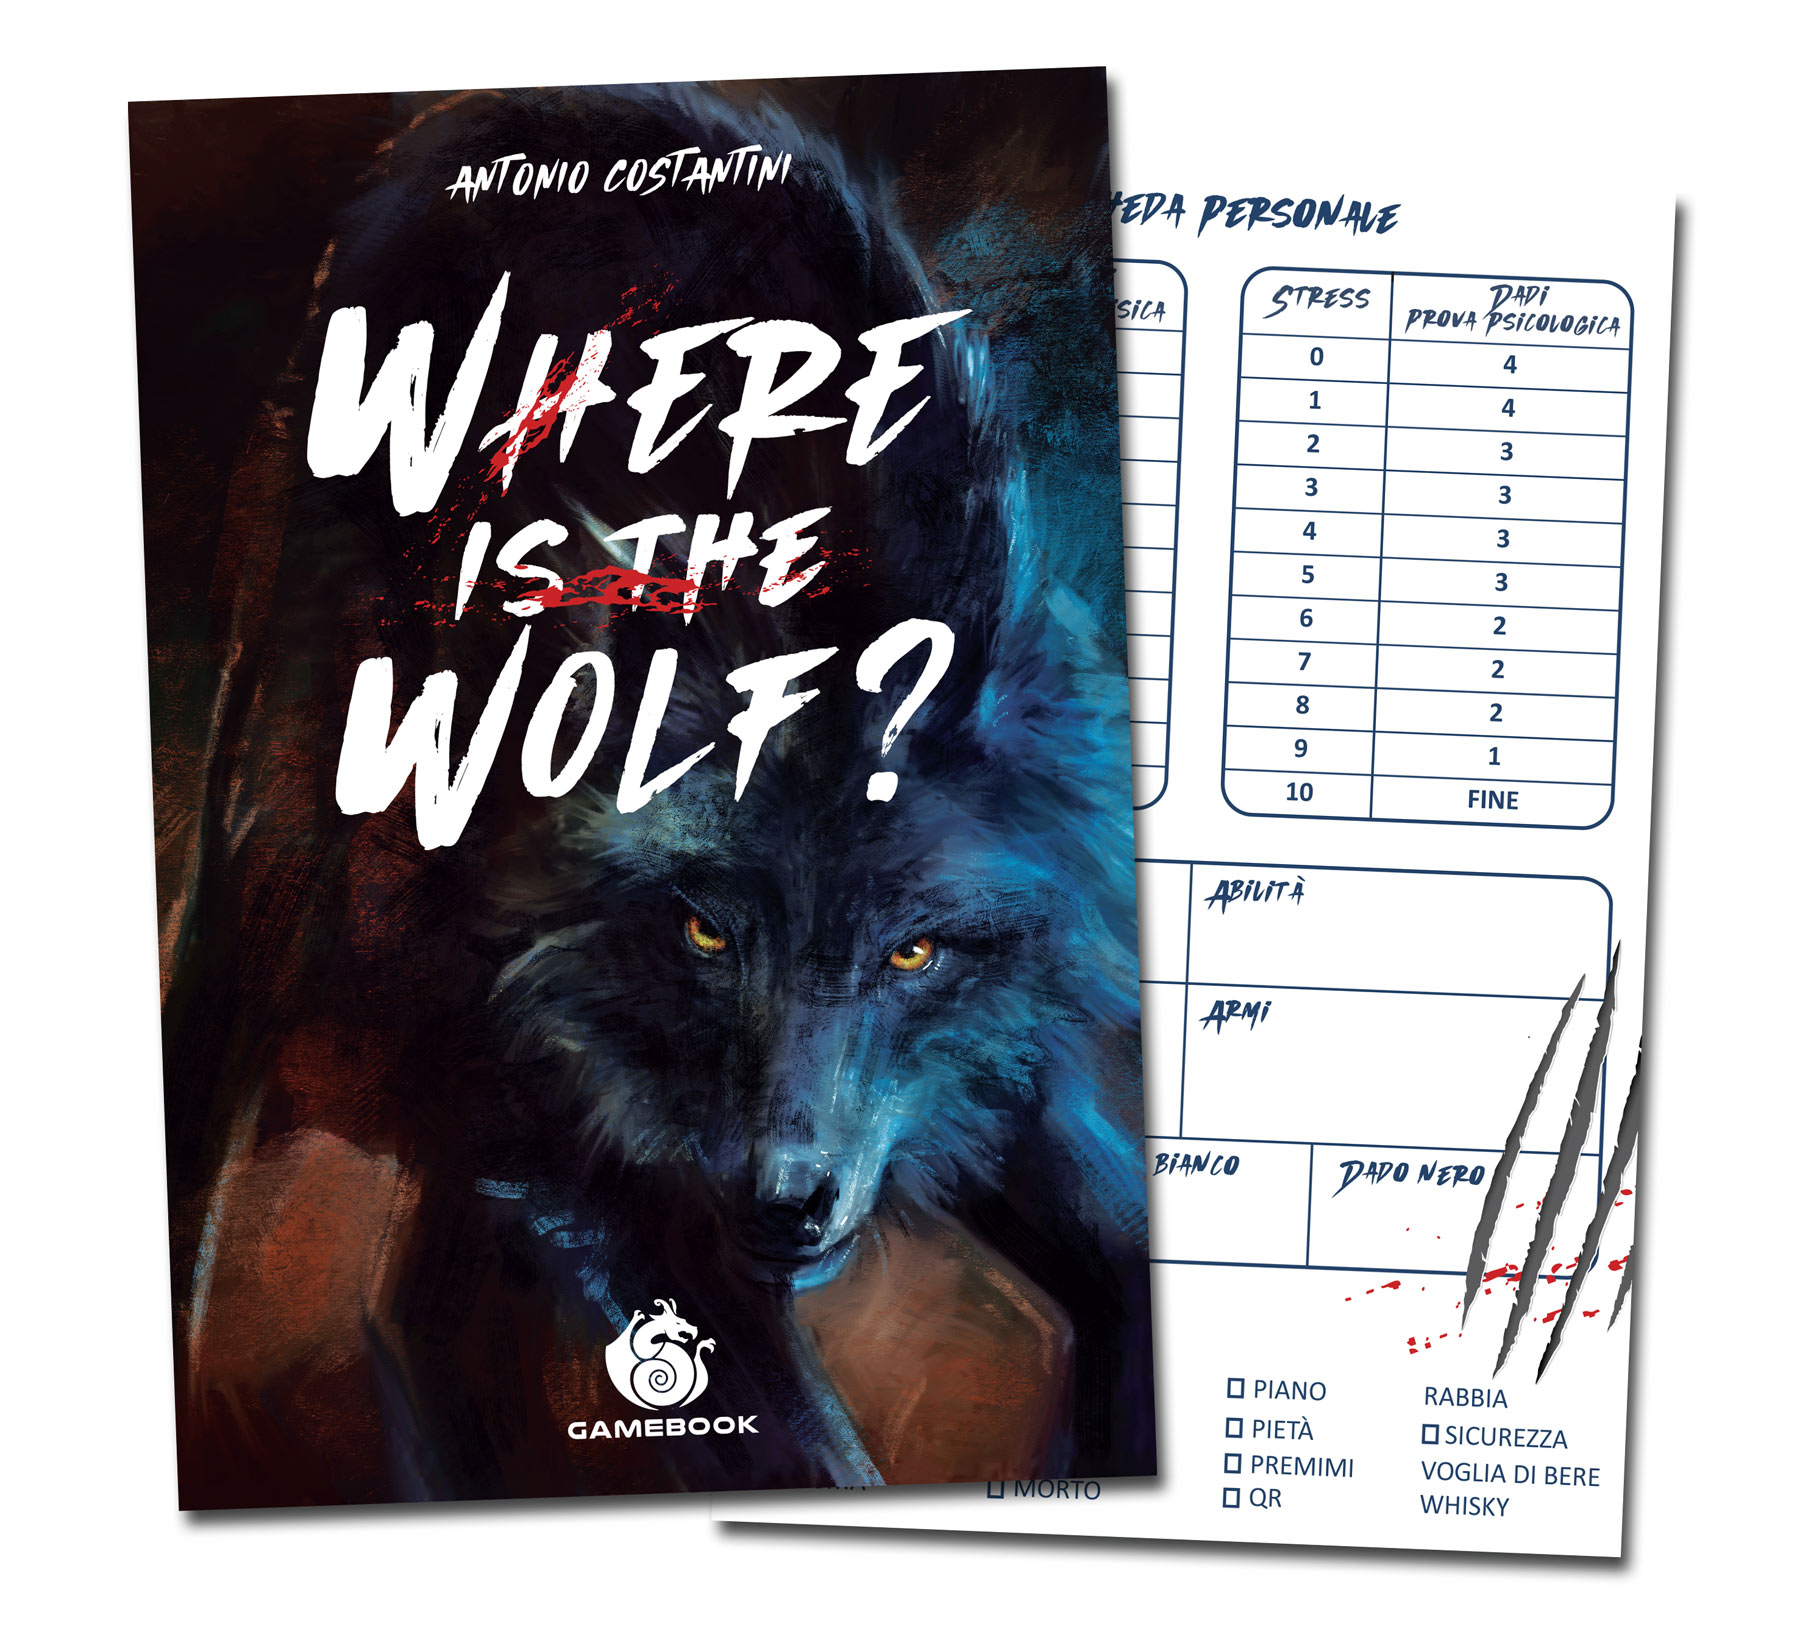 gamebook where is the wolf